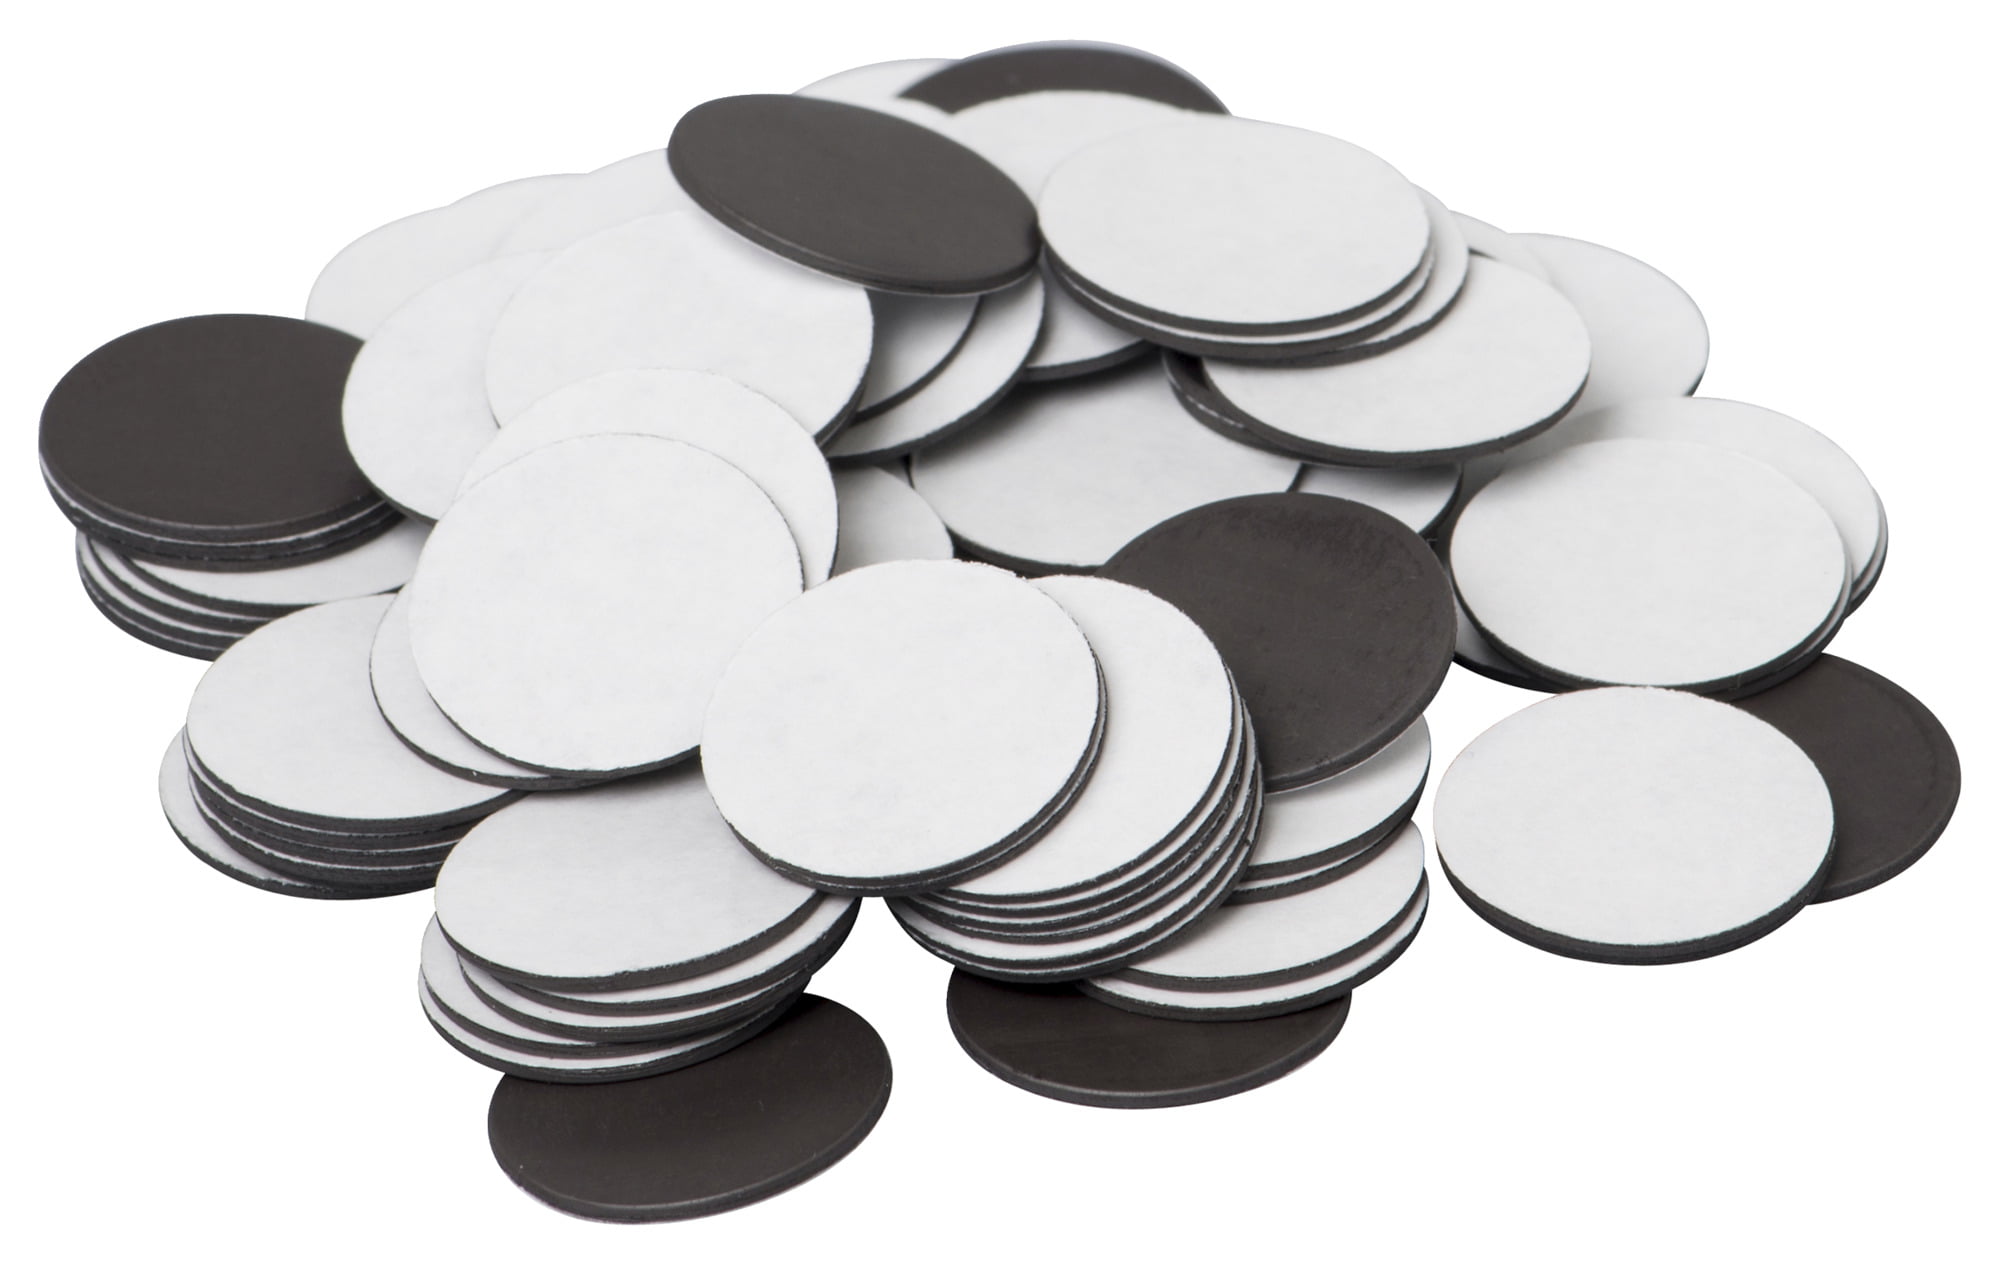 Round Magnets with Adhesive Backing, 120 Pieces Magnet Circles (Diameter  0.8'” x 0.08”) on 4 Tape Sheets, with 3M Strong Adhesive Backing. Perfect  for